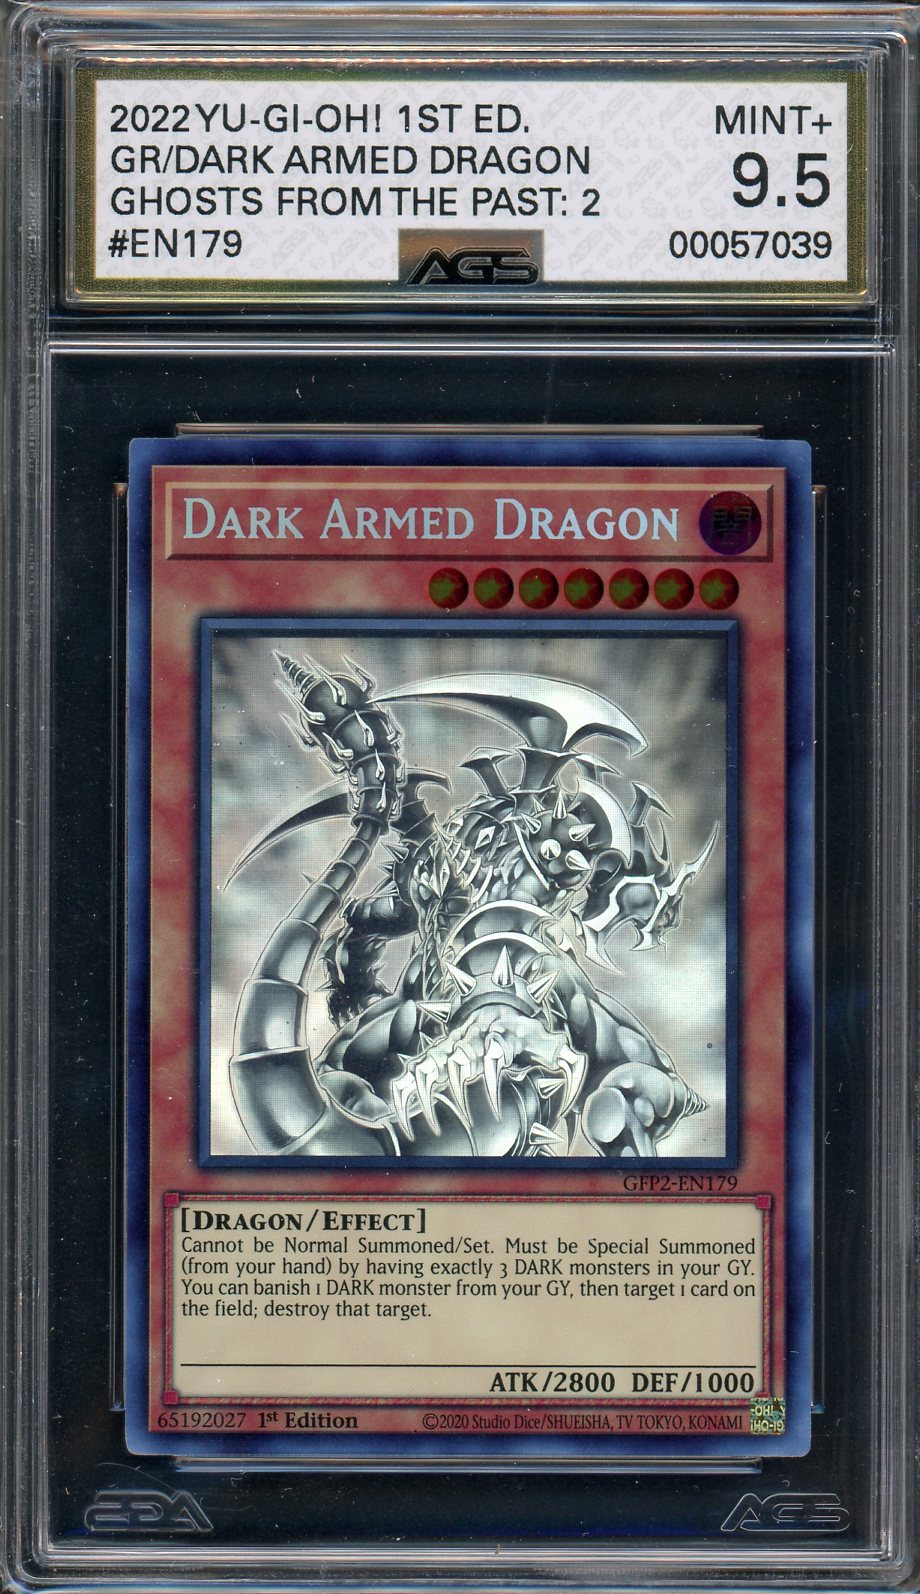 AGS (MINT+ 9.5) Dark Armed Dragon #EN179 - Ghosts From The Past The 2nd Haunting (#00057039)